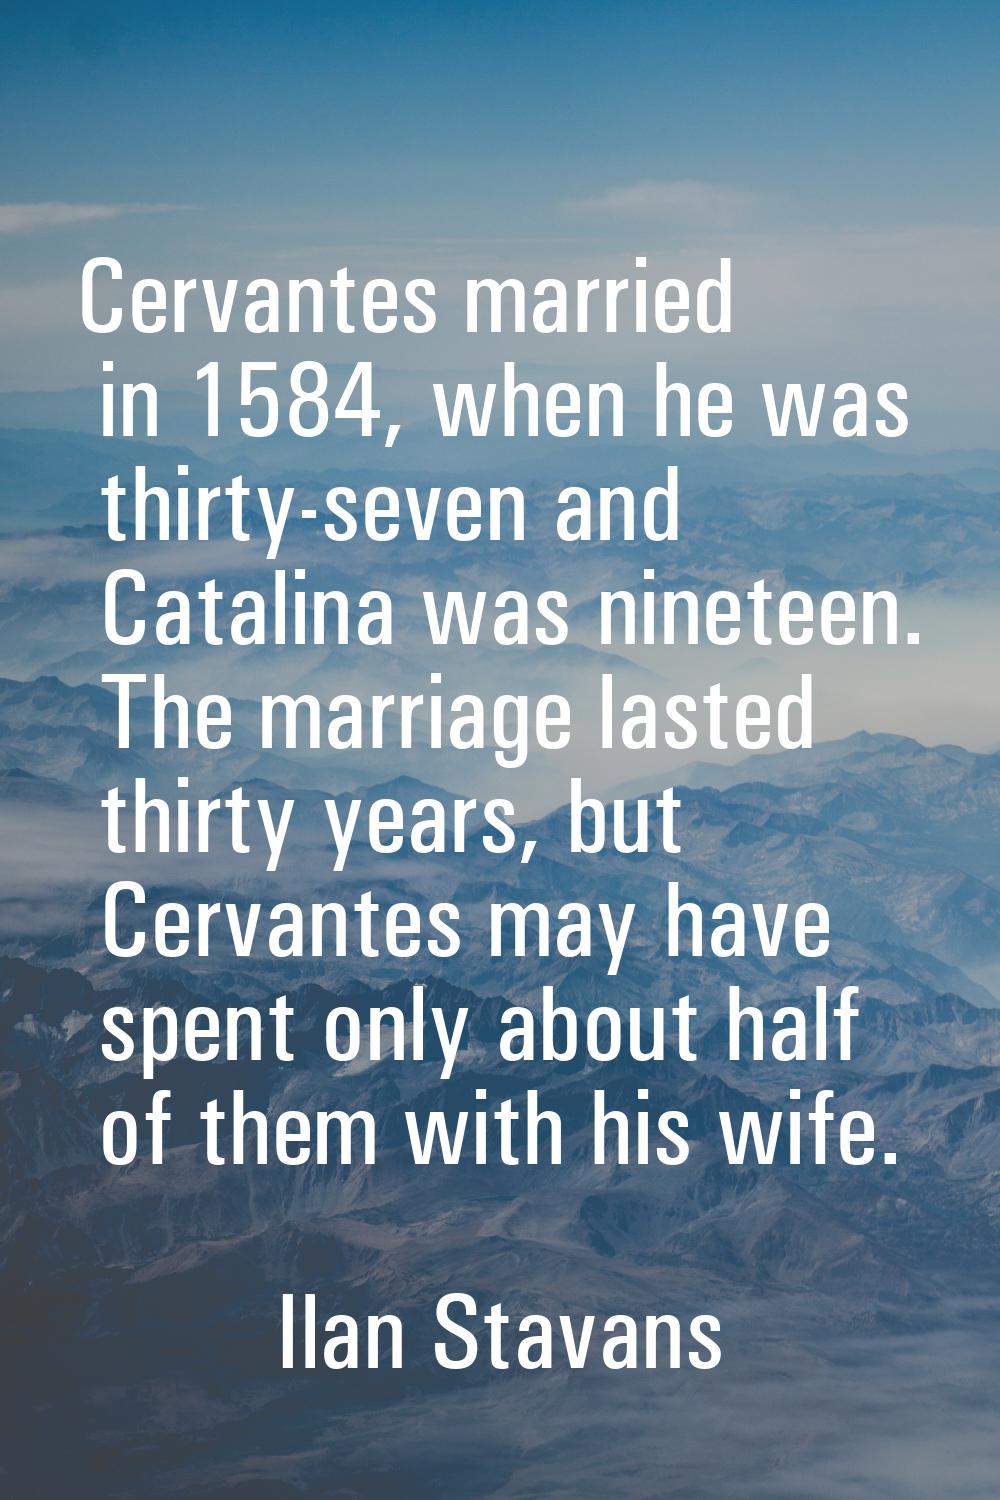 Cervantes married in 1584, when he was thirty-seven and Catalina was nineteen. The marriage lasted 